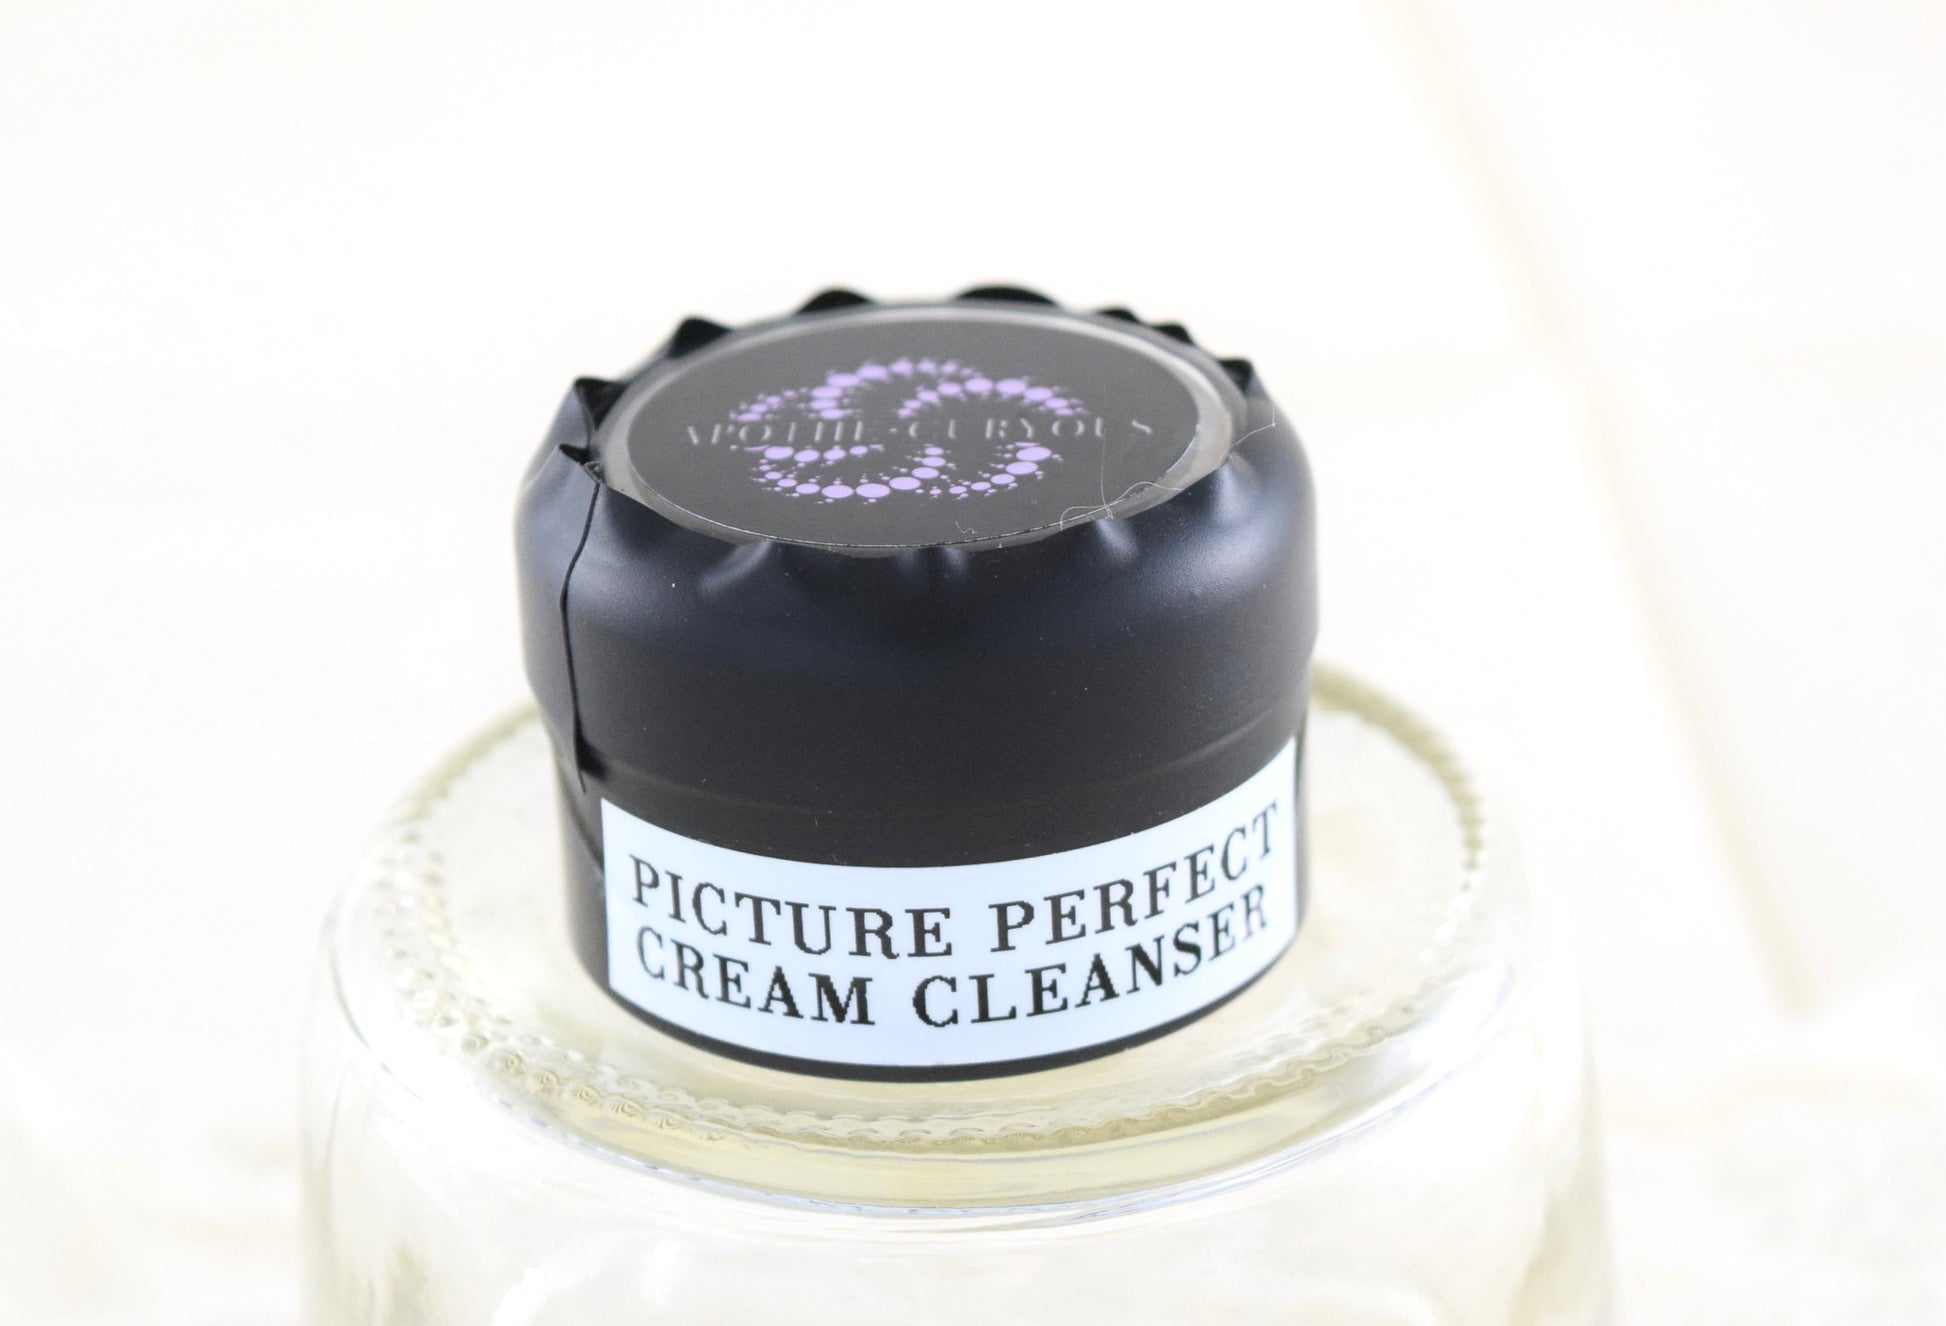 Trial size Picture Perfect Cream Cleanser, Apothecuryous